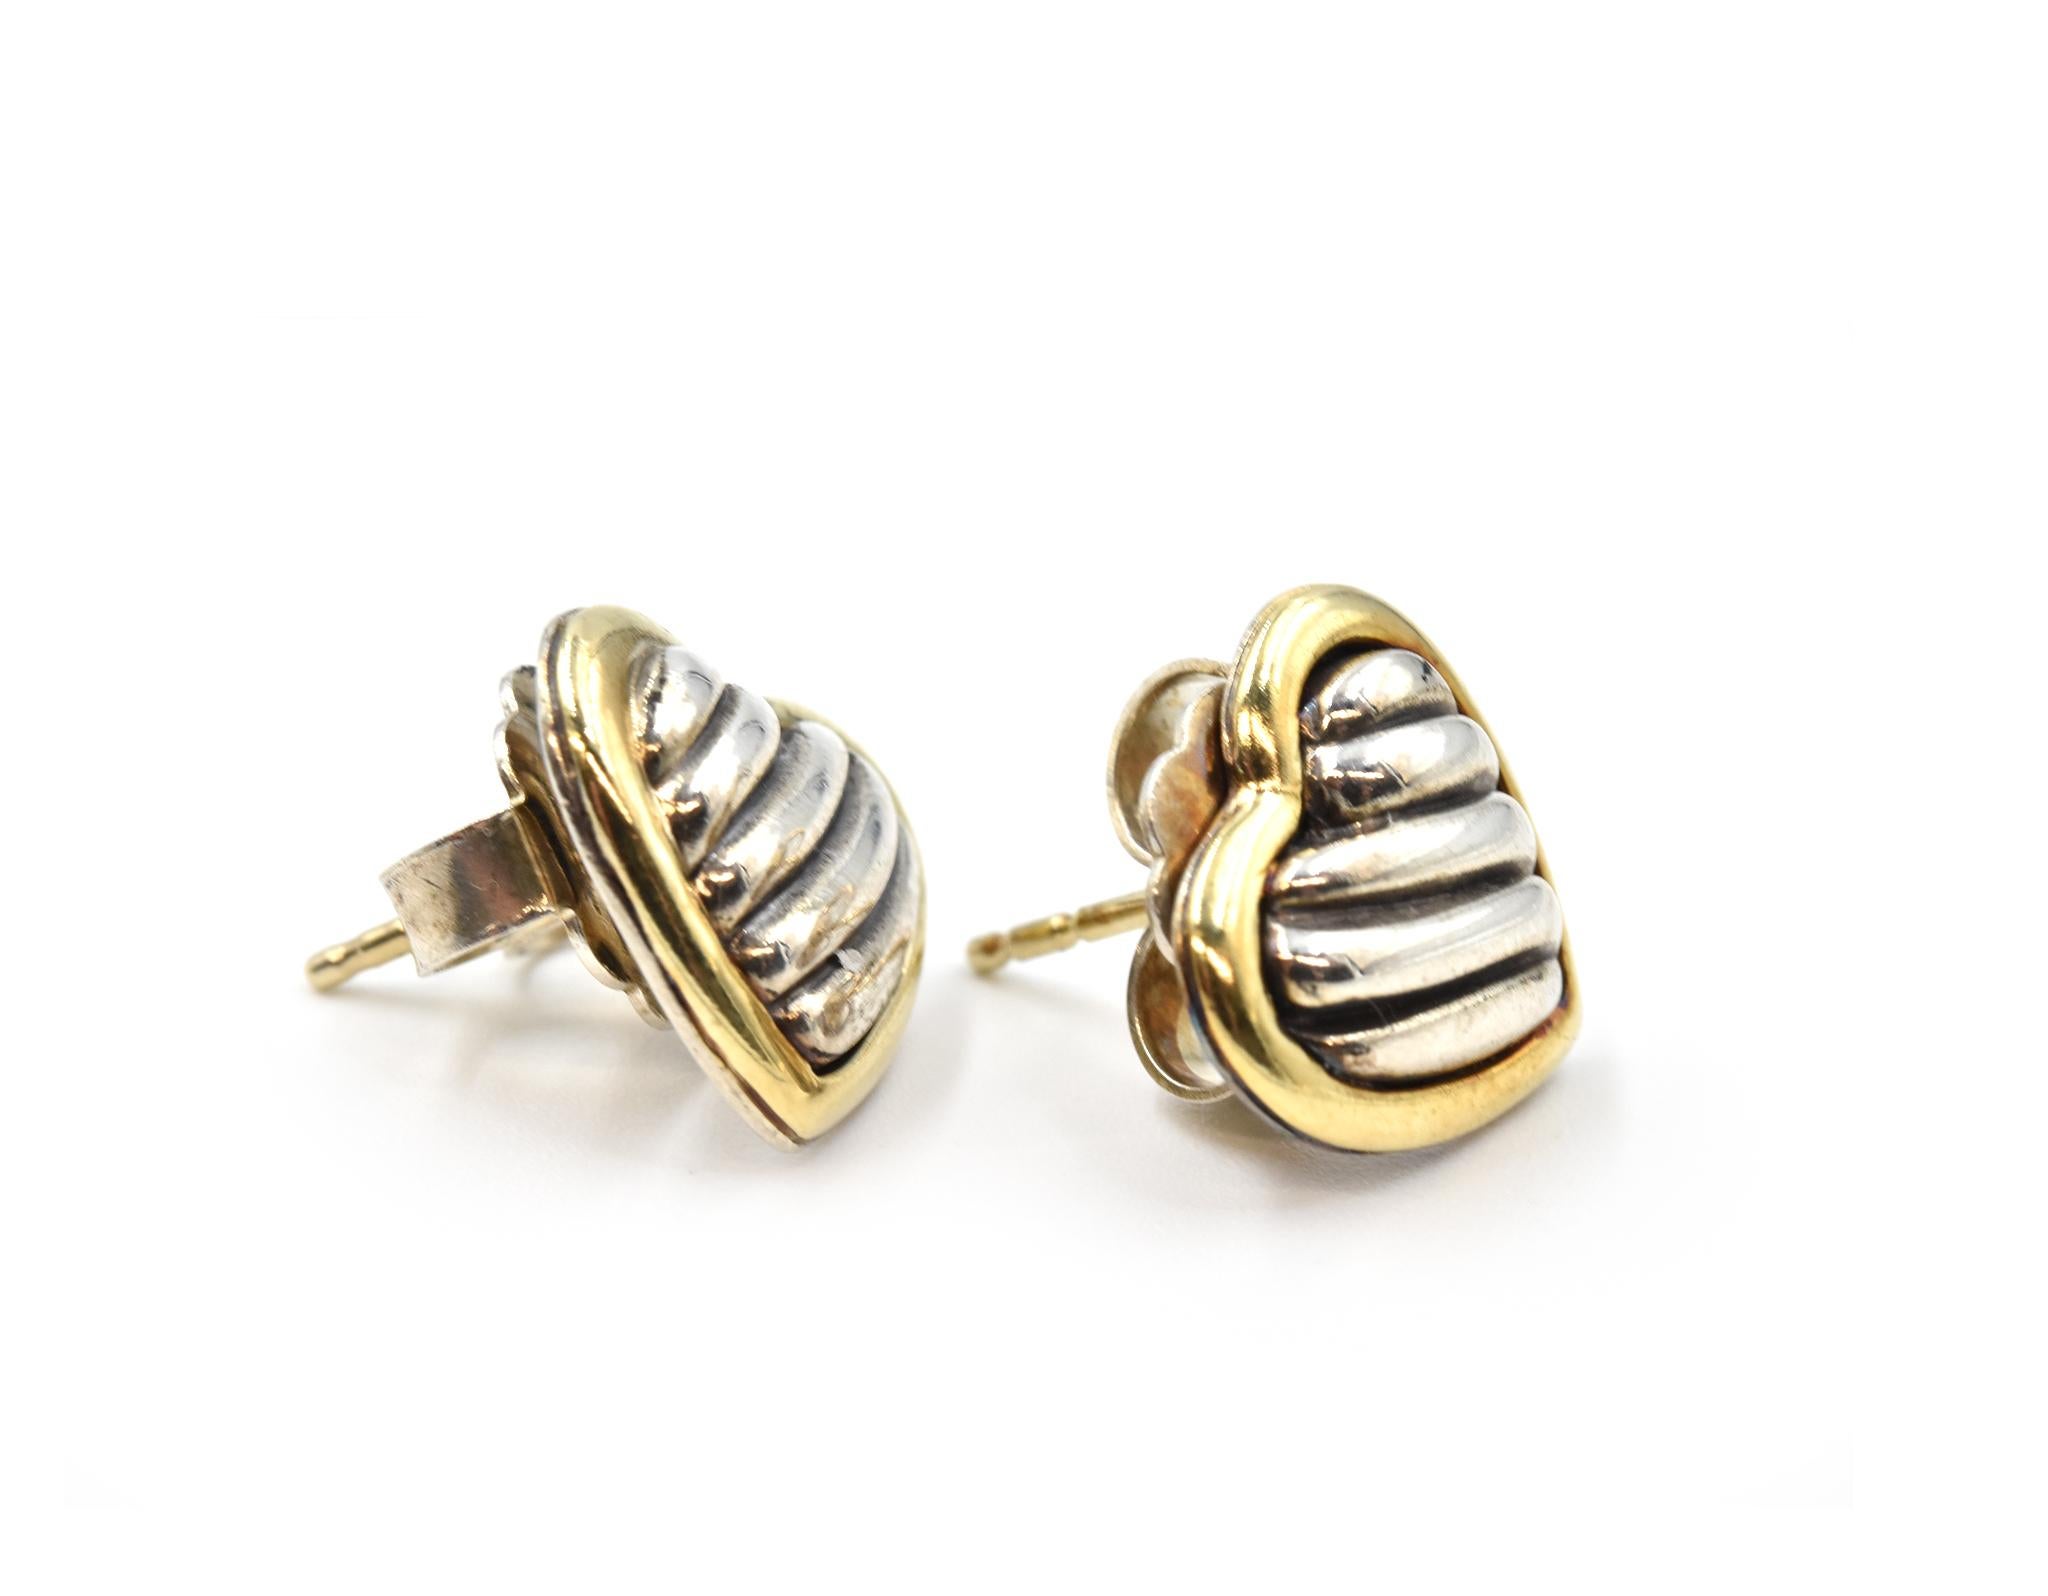 Designer: David Yurman
Material: 18k yellow gold and Sterling Silver
Dimensions: 13.1mm x 12.3mm
Fastenings: friction back
Weight: 4.75 grams
